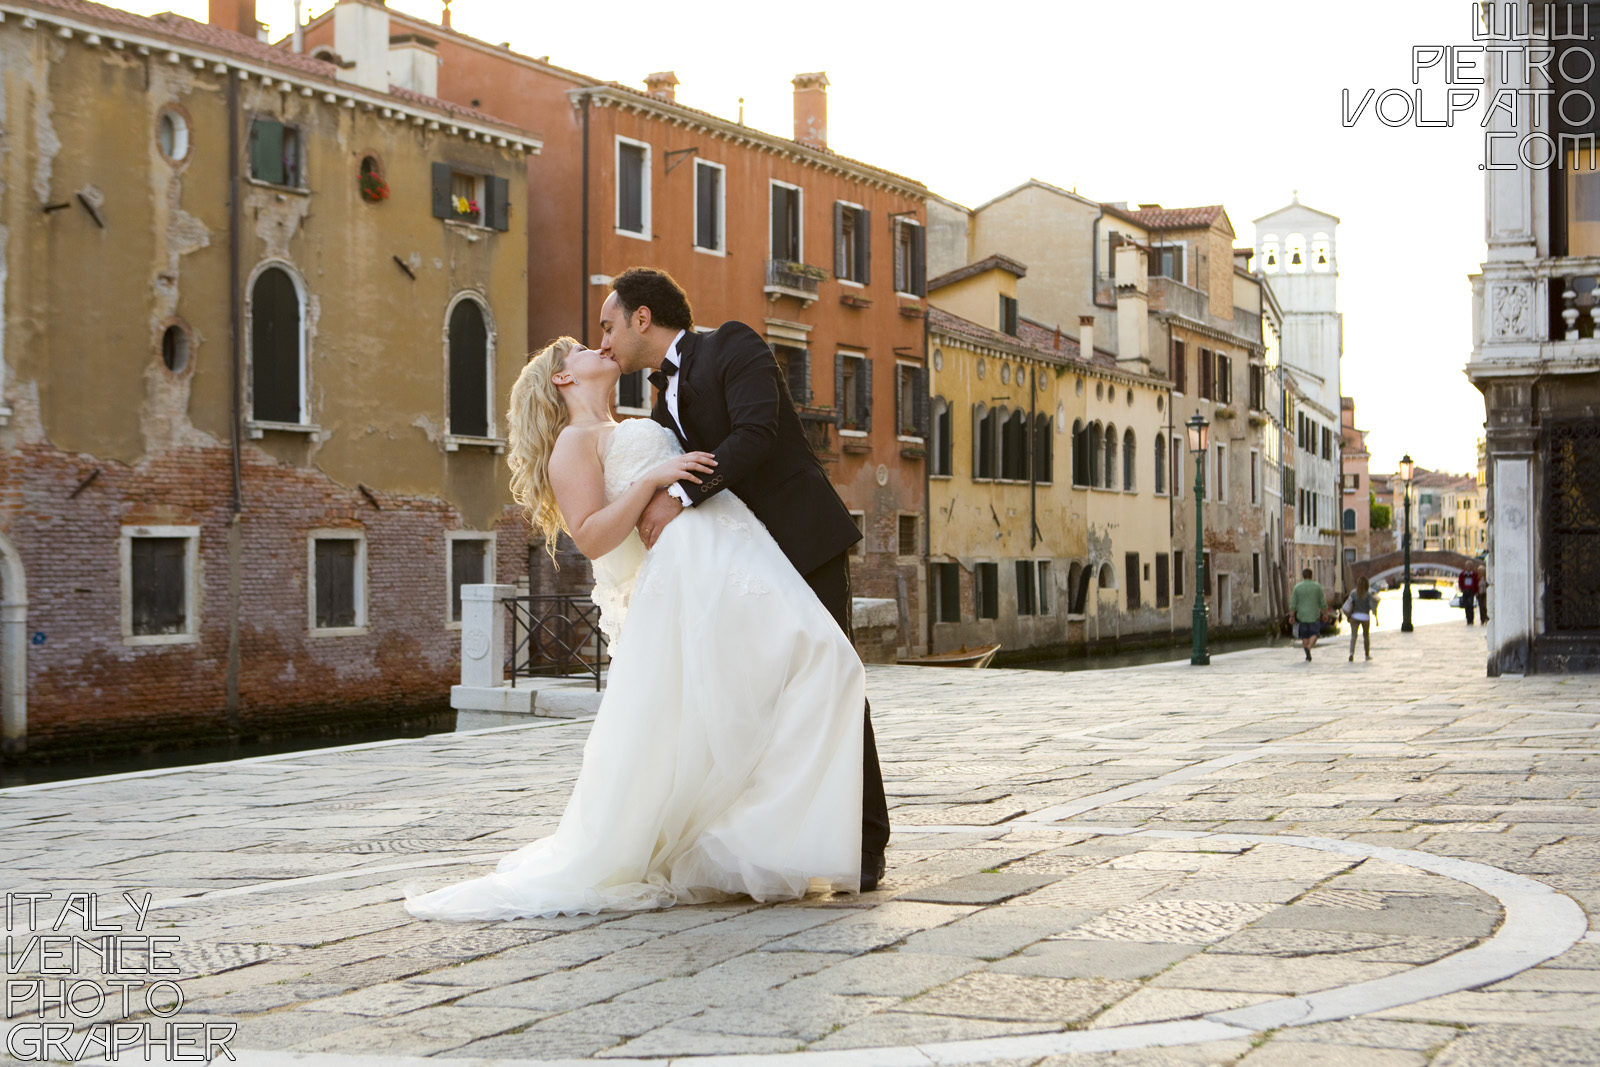 Hire a photographer in Venice Italy for honeymoon photo shoot during a walking tour and gondola ride ~ Romantic and fun photo walk in Venice